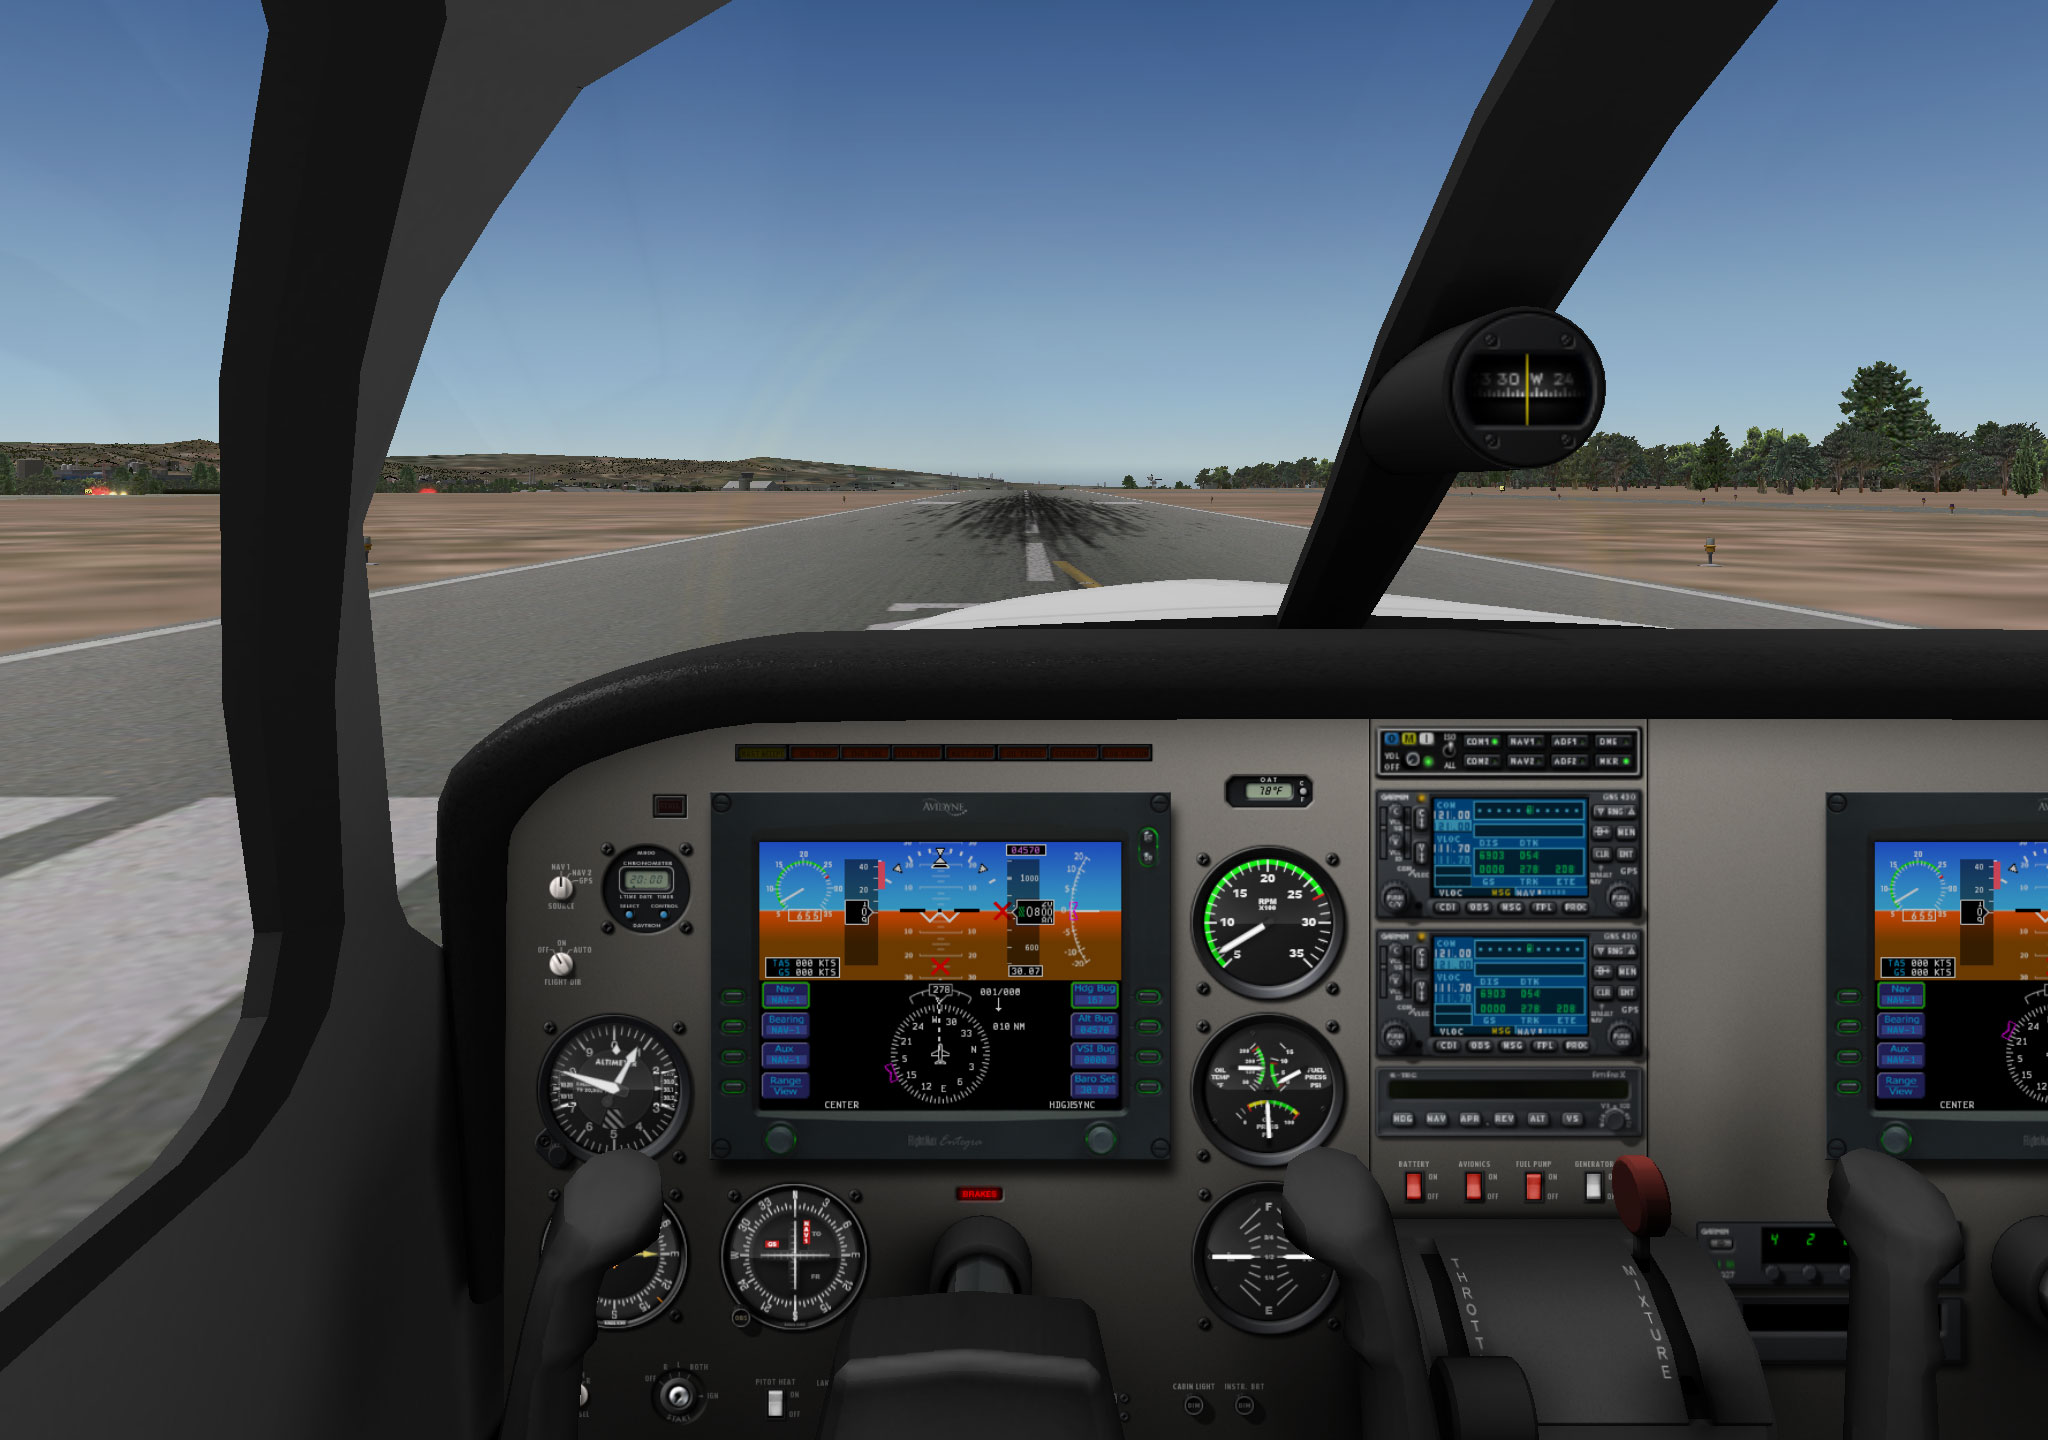 CBT - Piper PA28-161 Warrior Systems Free Download